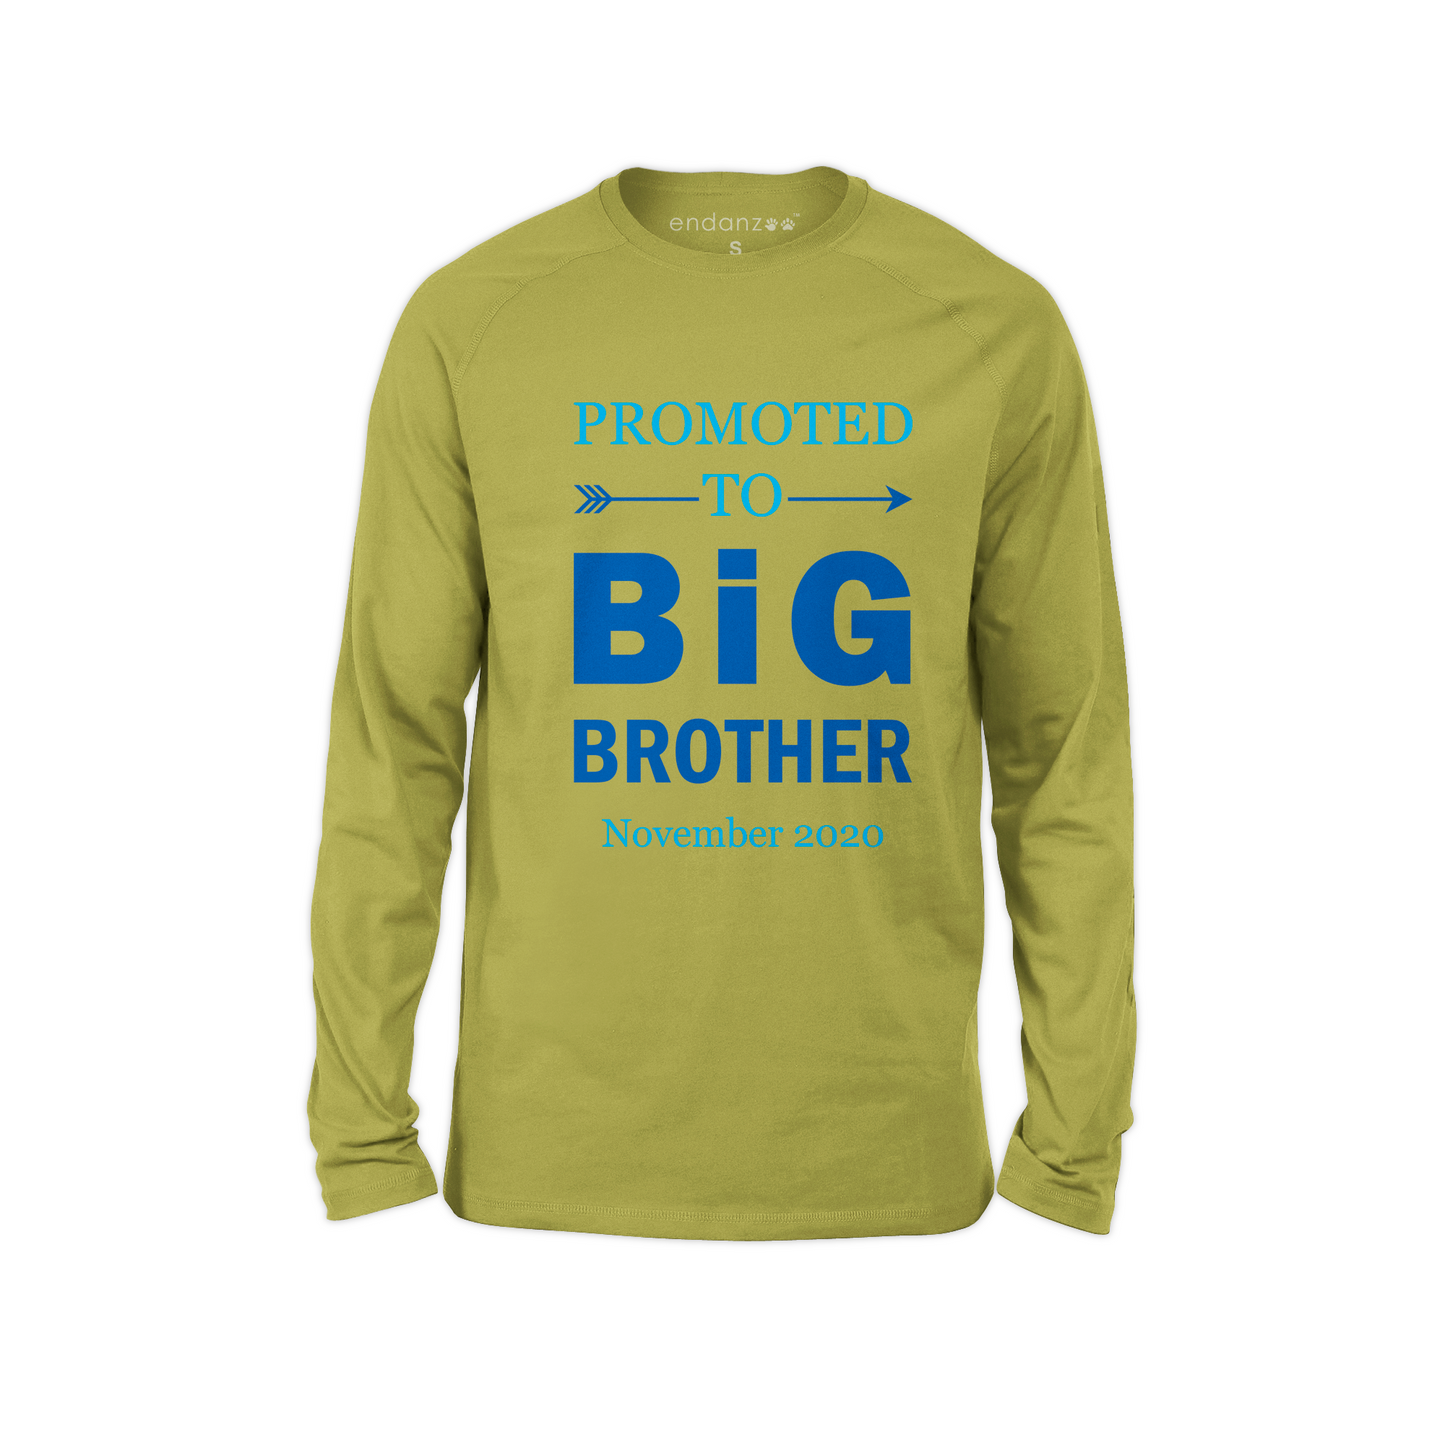 [Personalized] Promoted To Big Brother Organic Kids Tee Shirt I Pregnancy Announcement Kids Tshirt